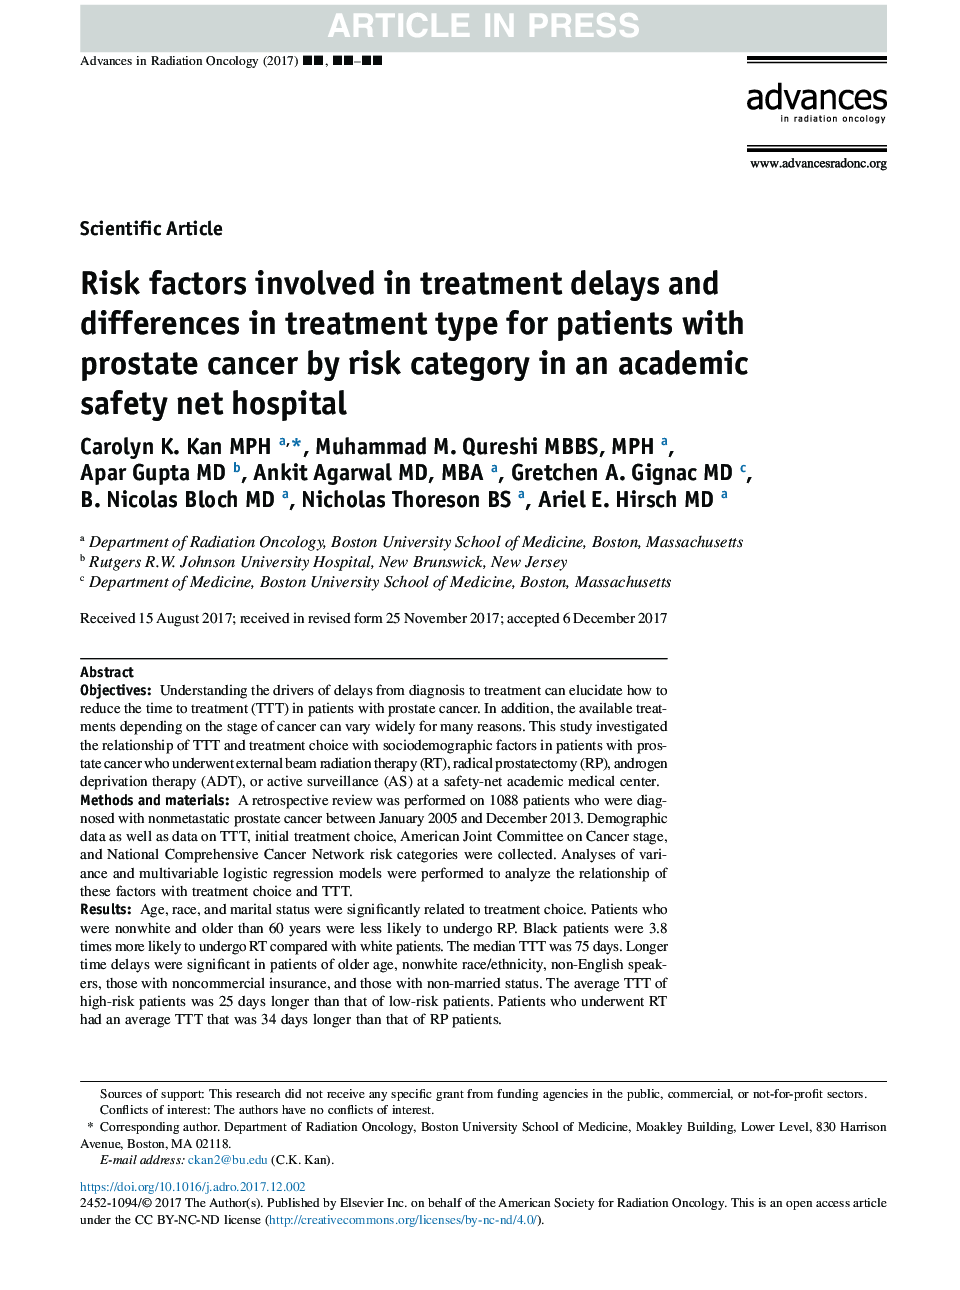 Risk factors involved in treatment delays and differences in treatment type for patients with prostate cancer by risk category in an academic safety net hospital